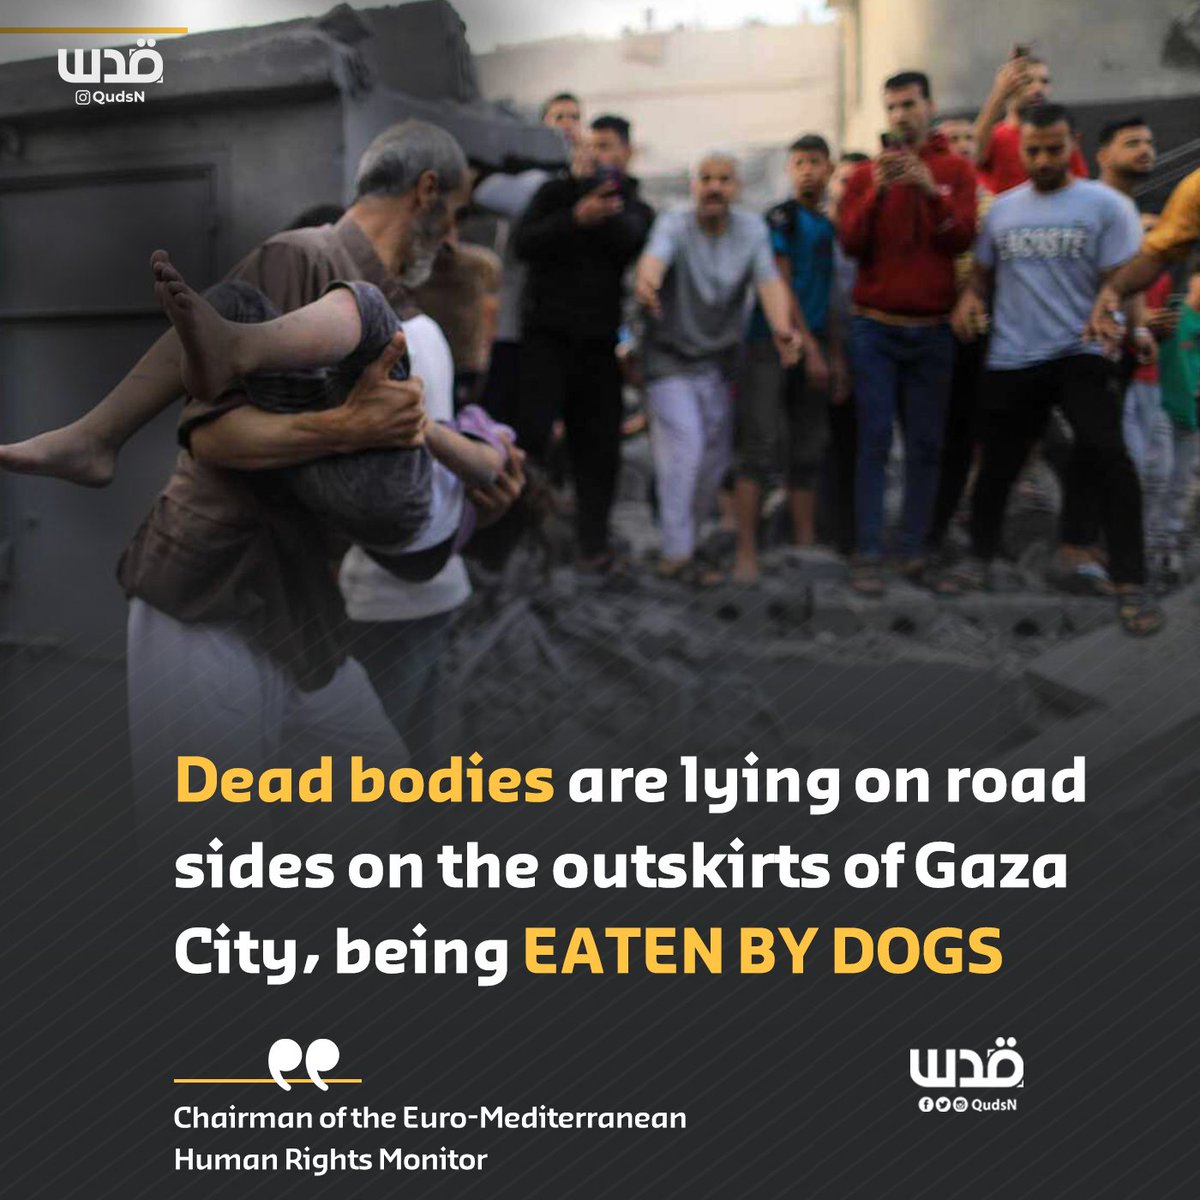 BREAKING | Rami Abdu, the Chairman of the Euro-Mediterranean Human Rights Monitor: ⭕ Dozens of dead bodies are lying on the sides of roads east and west of Gaza City, and are being EATEN BY DOGS. ⭕ Hundreds of victims are missing under the rubble, and their bodies are…